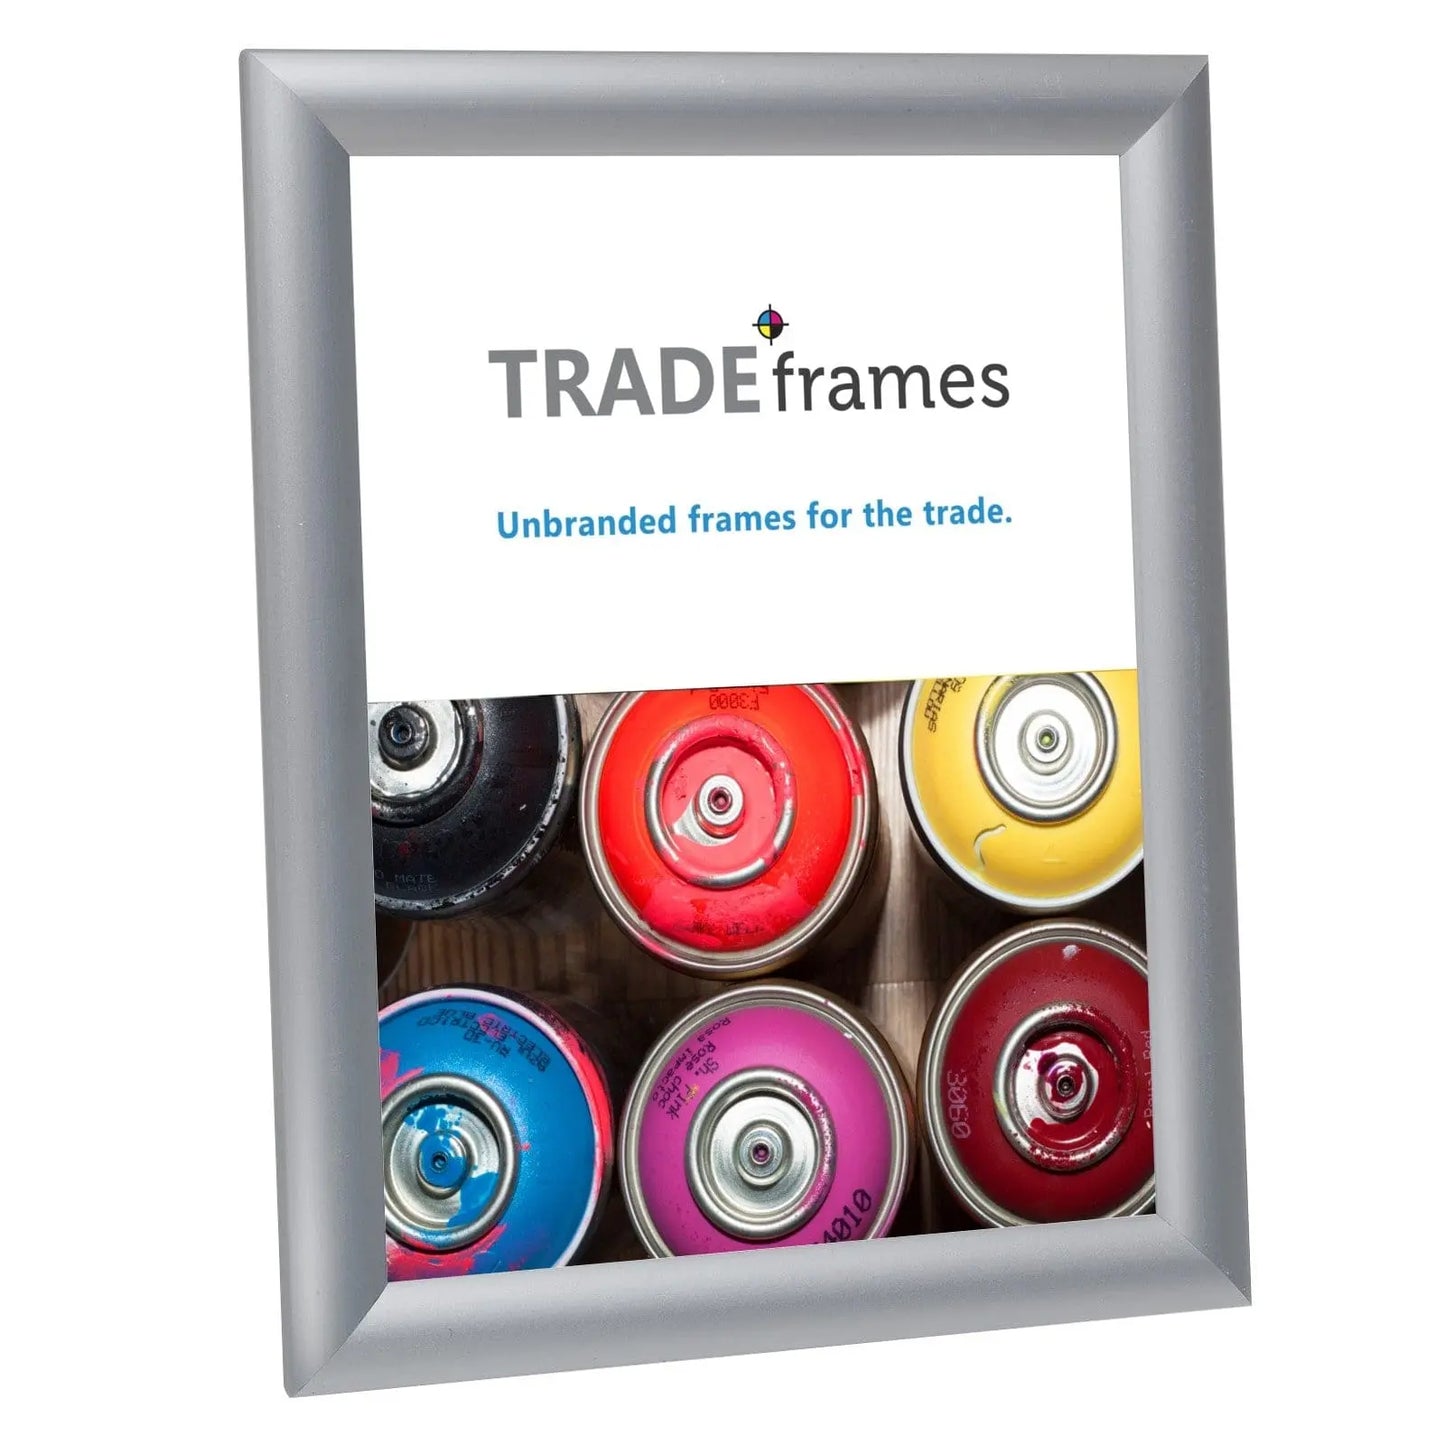  The Display Guys - 20x24 V-Series Low Profile Wooden Picture  Frames - 16x20 Mat - Plexiglass - Wall - Black - 6-Pack